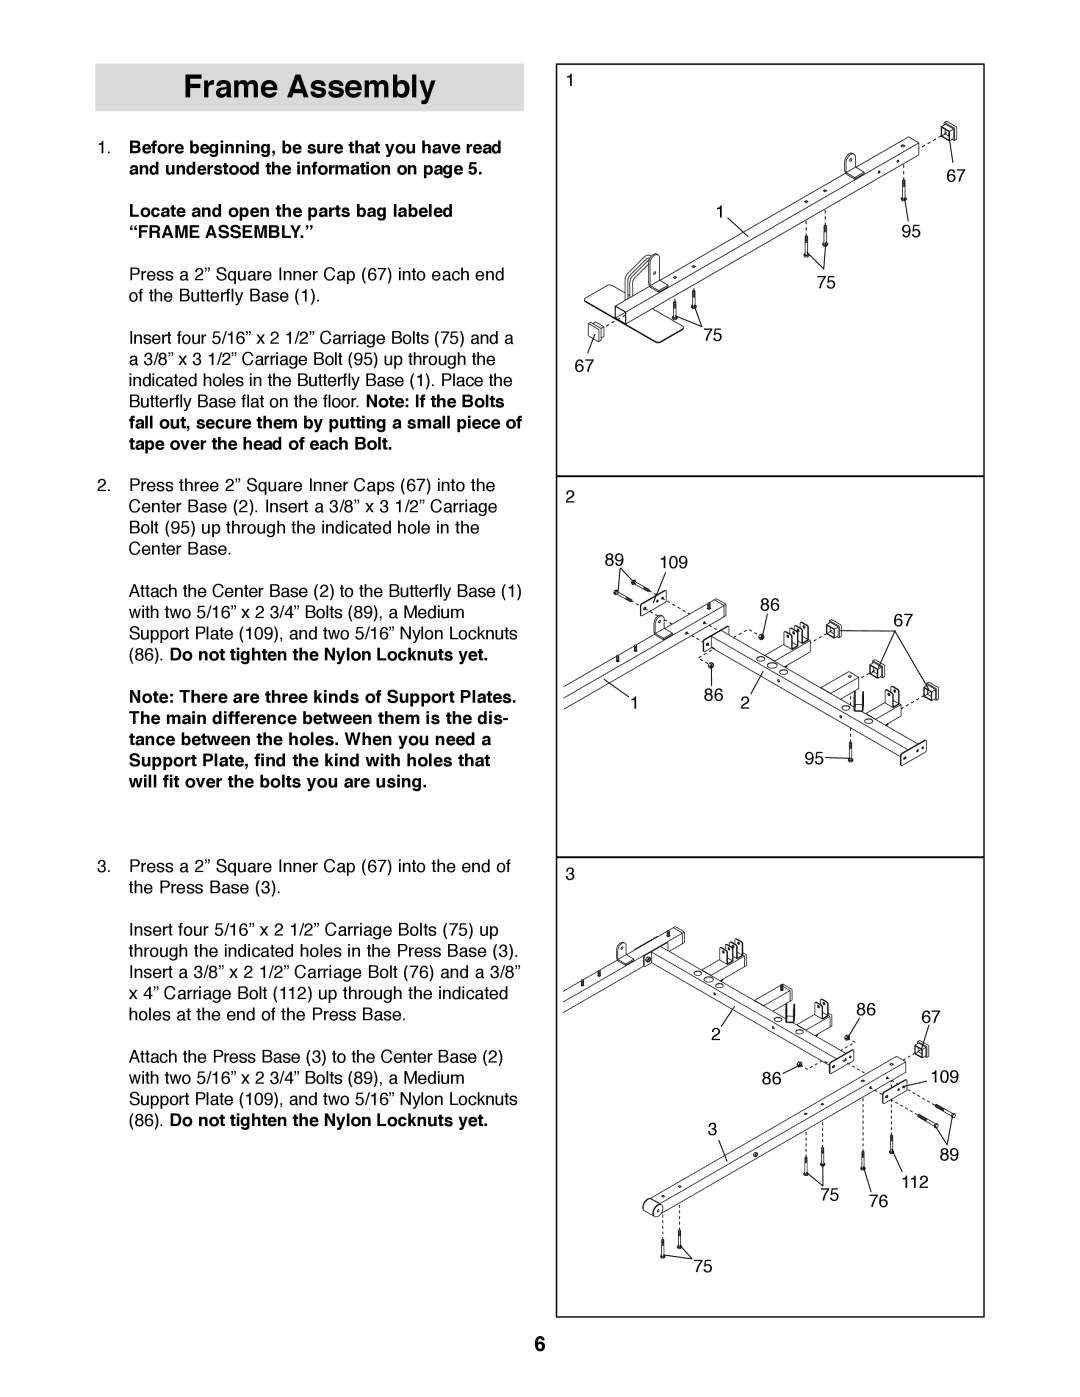 Weider 831.159830 user manual Frame Assembly, Locate and open the parts bag labeled “FRAME ASSEMBLY.” 